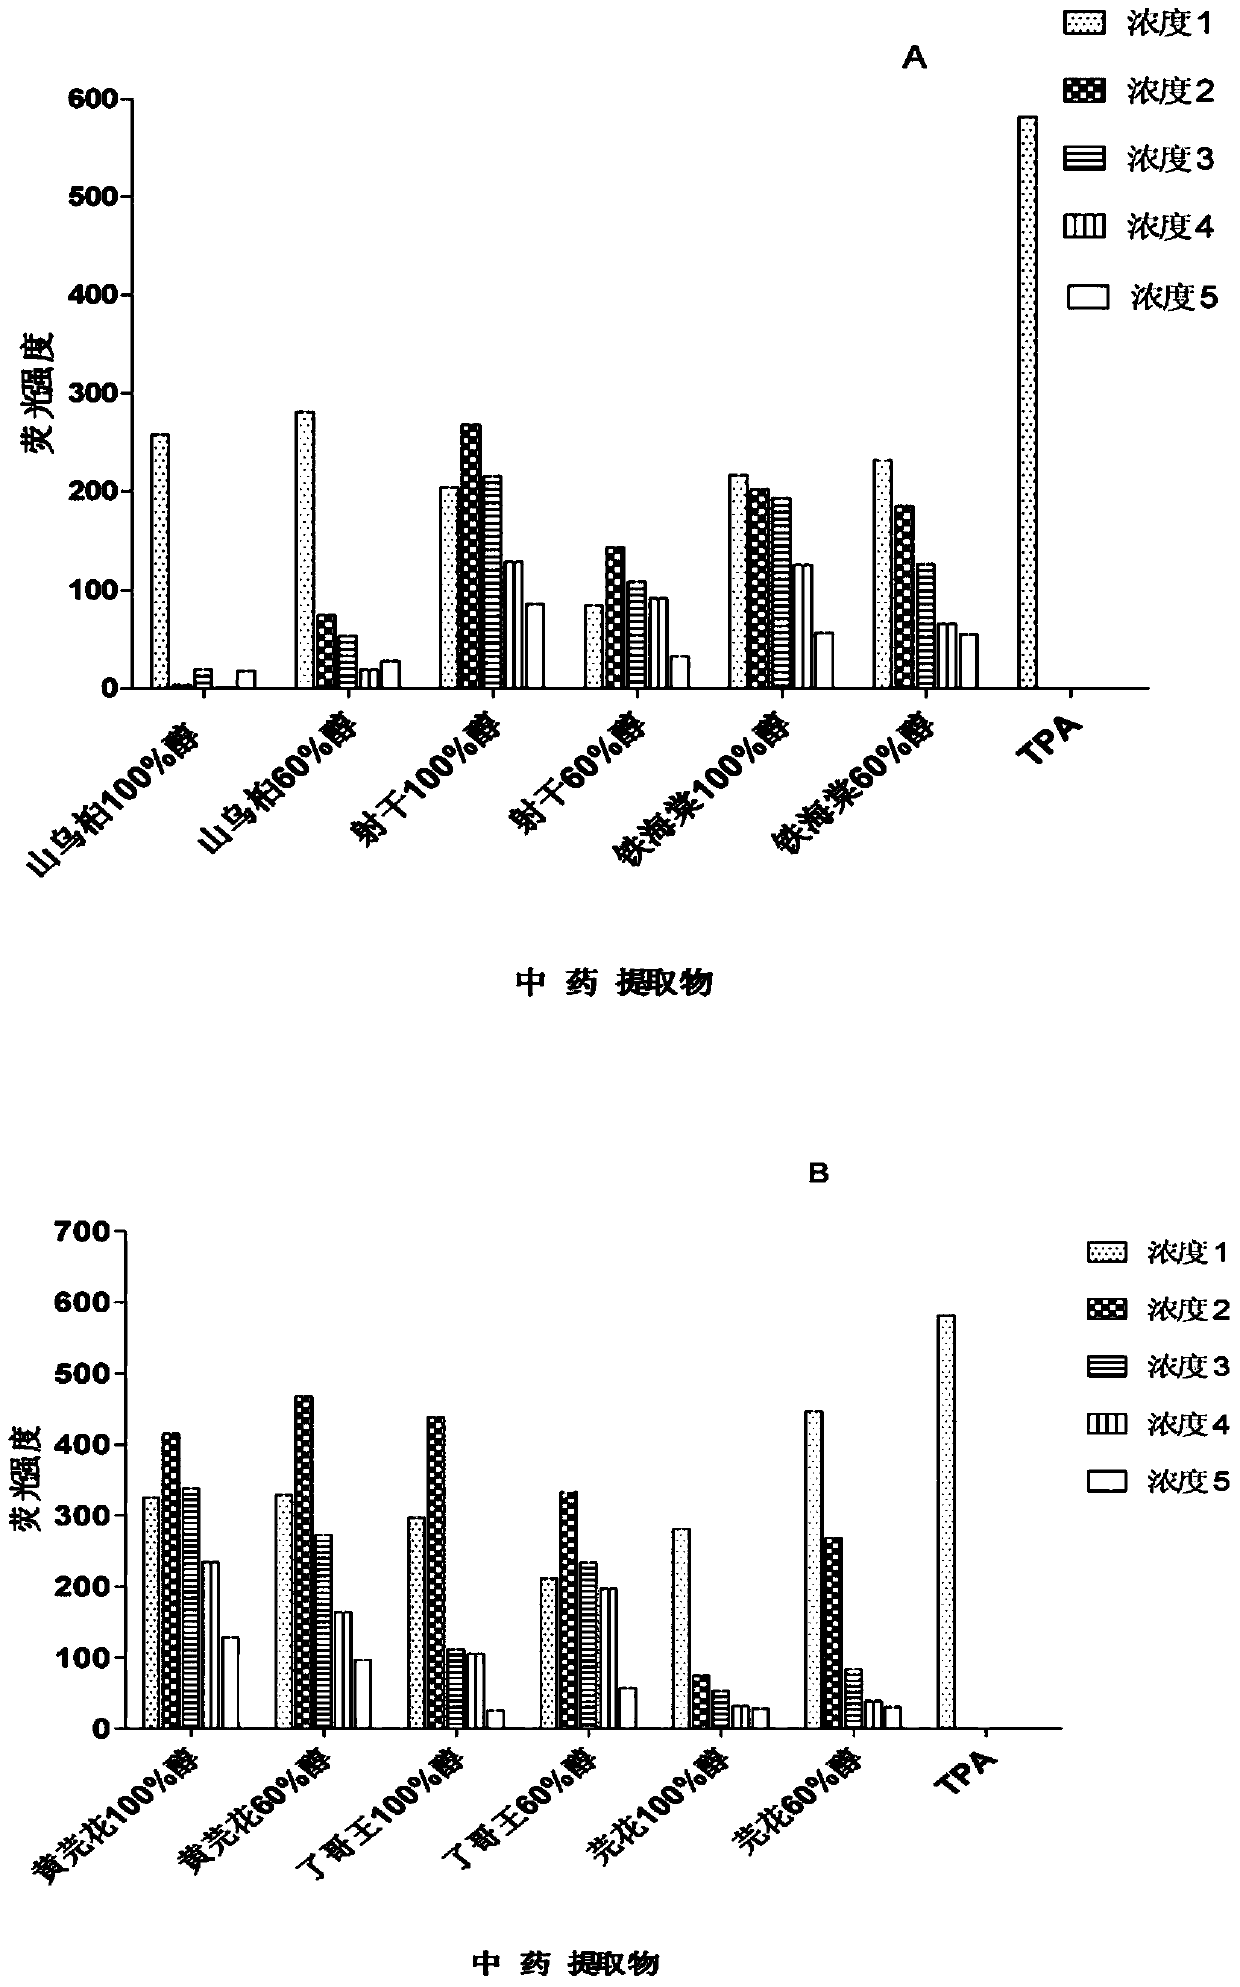 Application of several traditional Chinese medicine extracts in the treatment of hiv latent reactivation